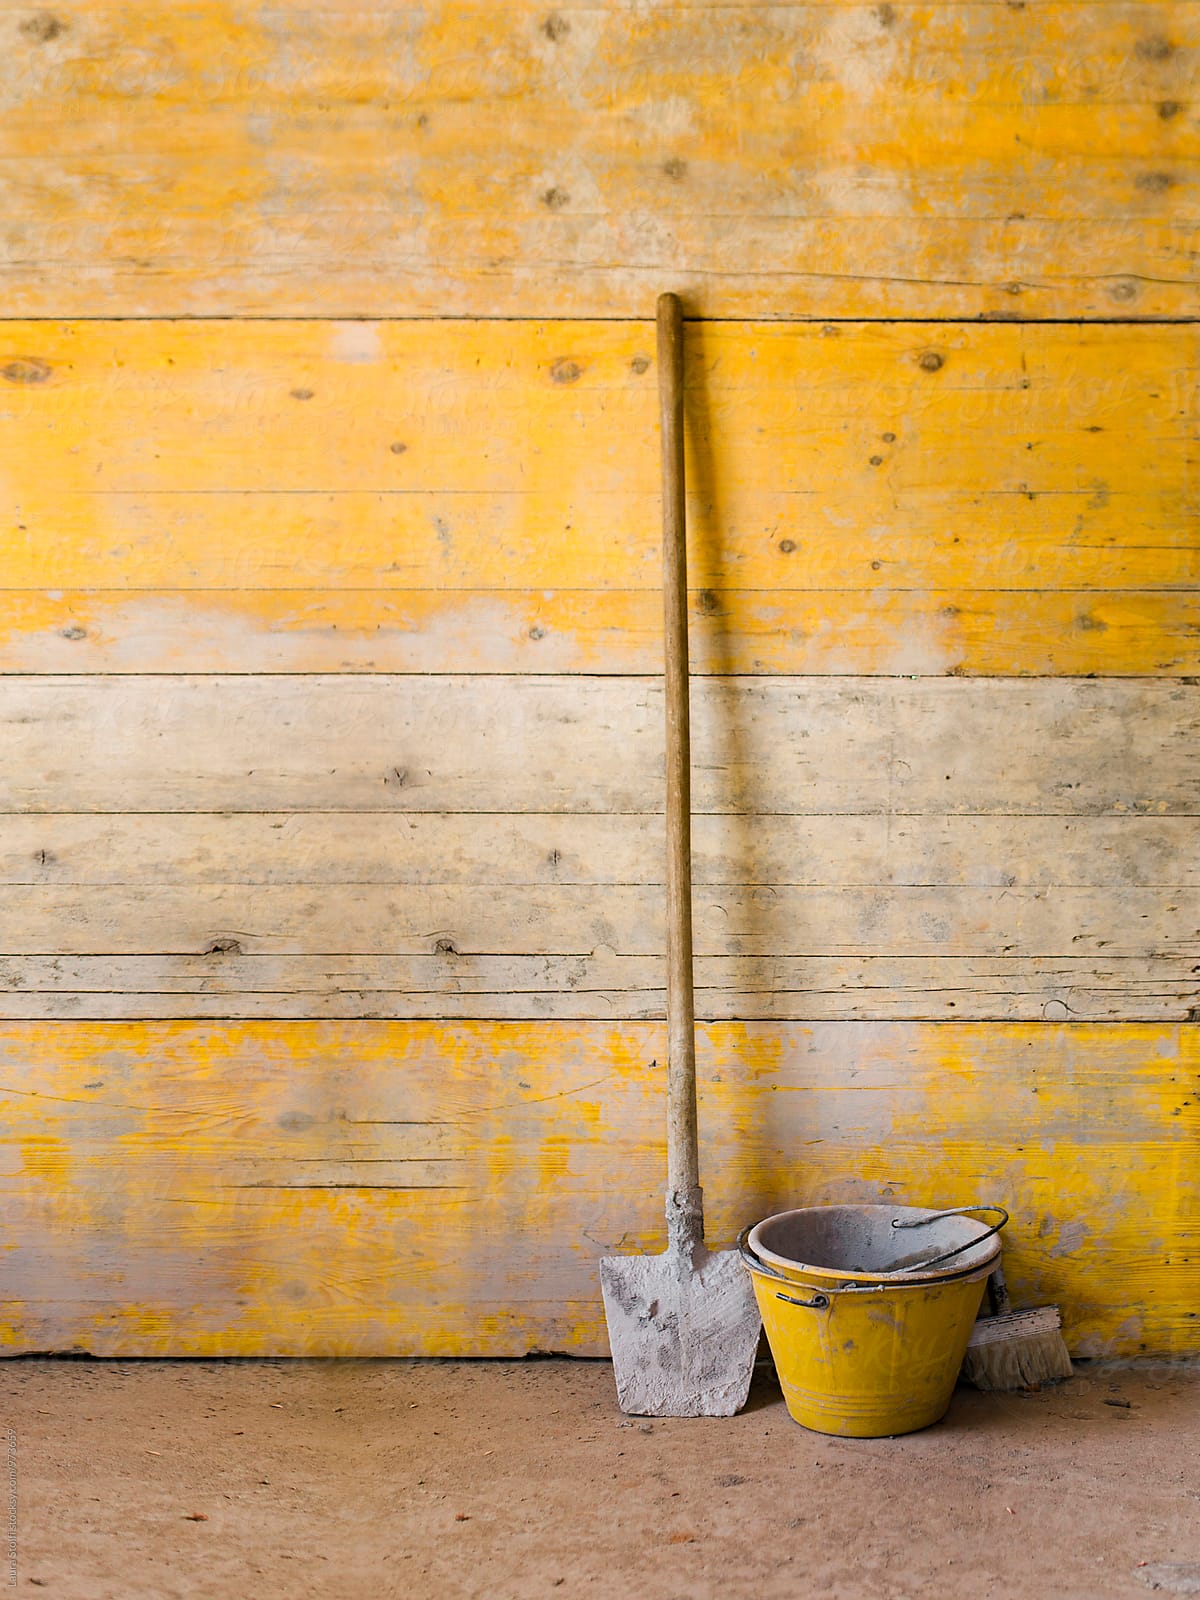 Working carpenter's tools in front of temporary wooden yellow wall